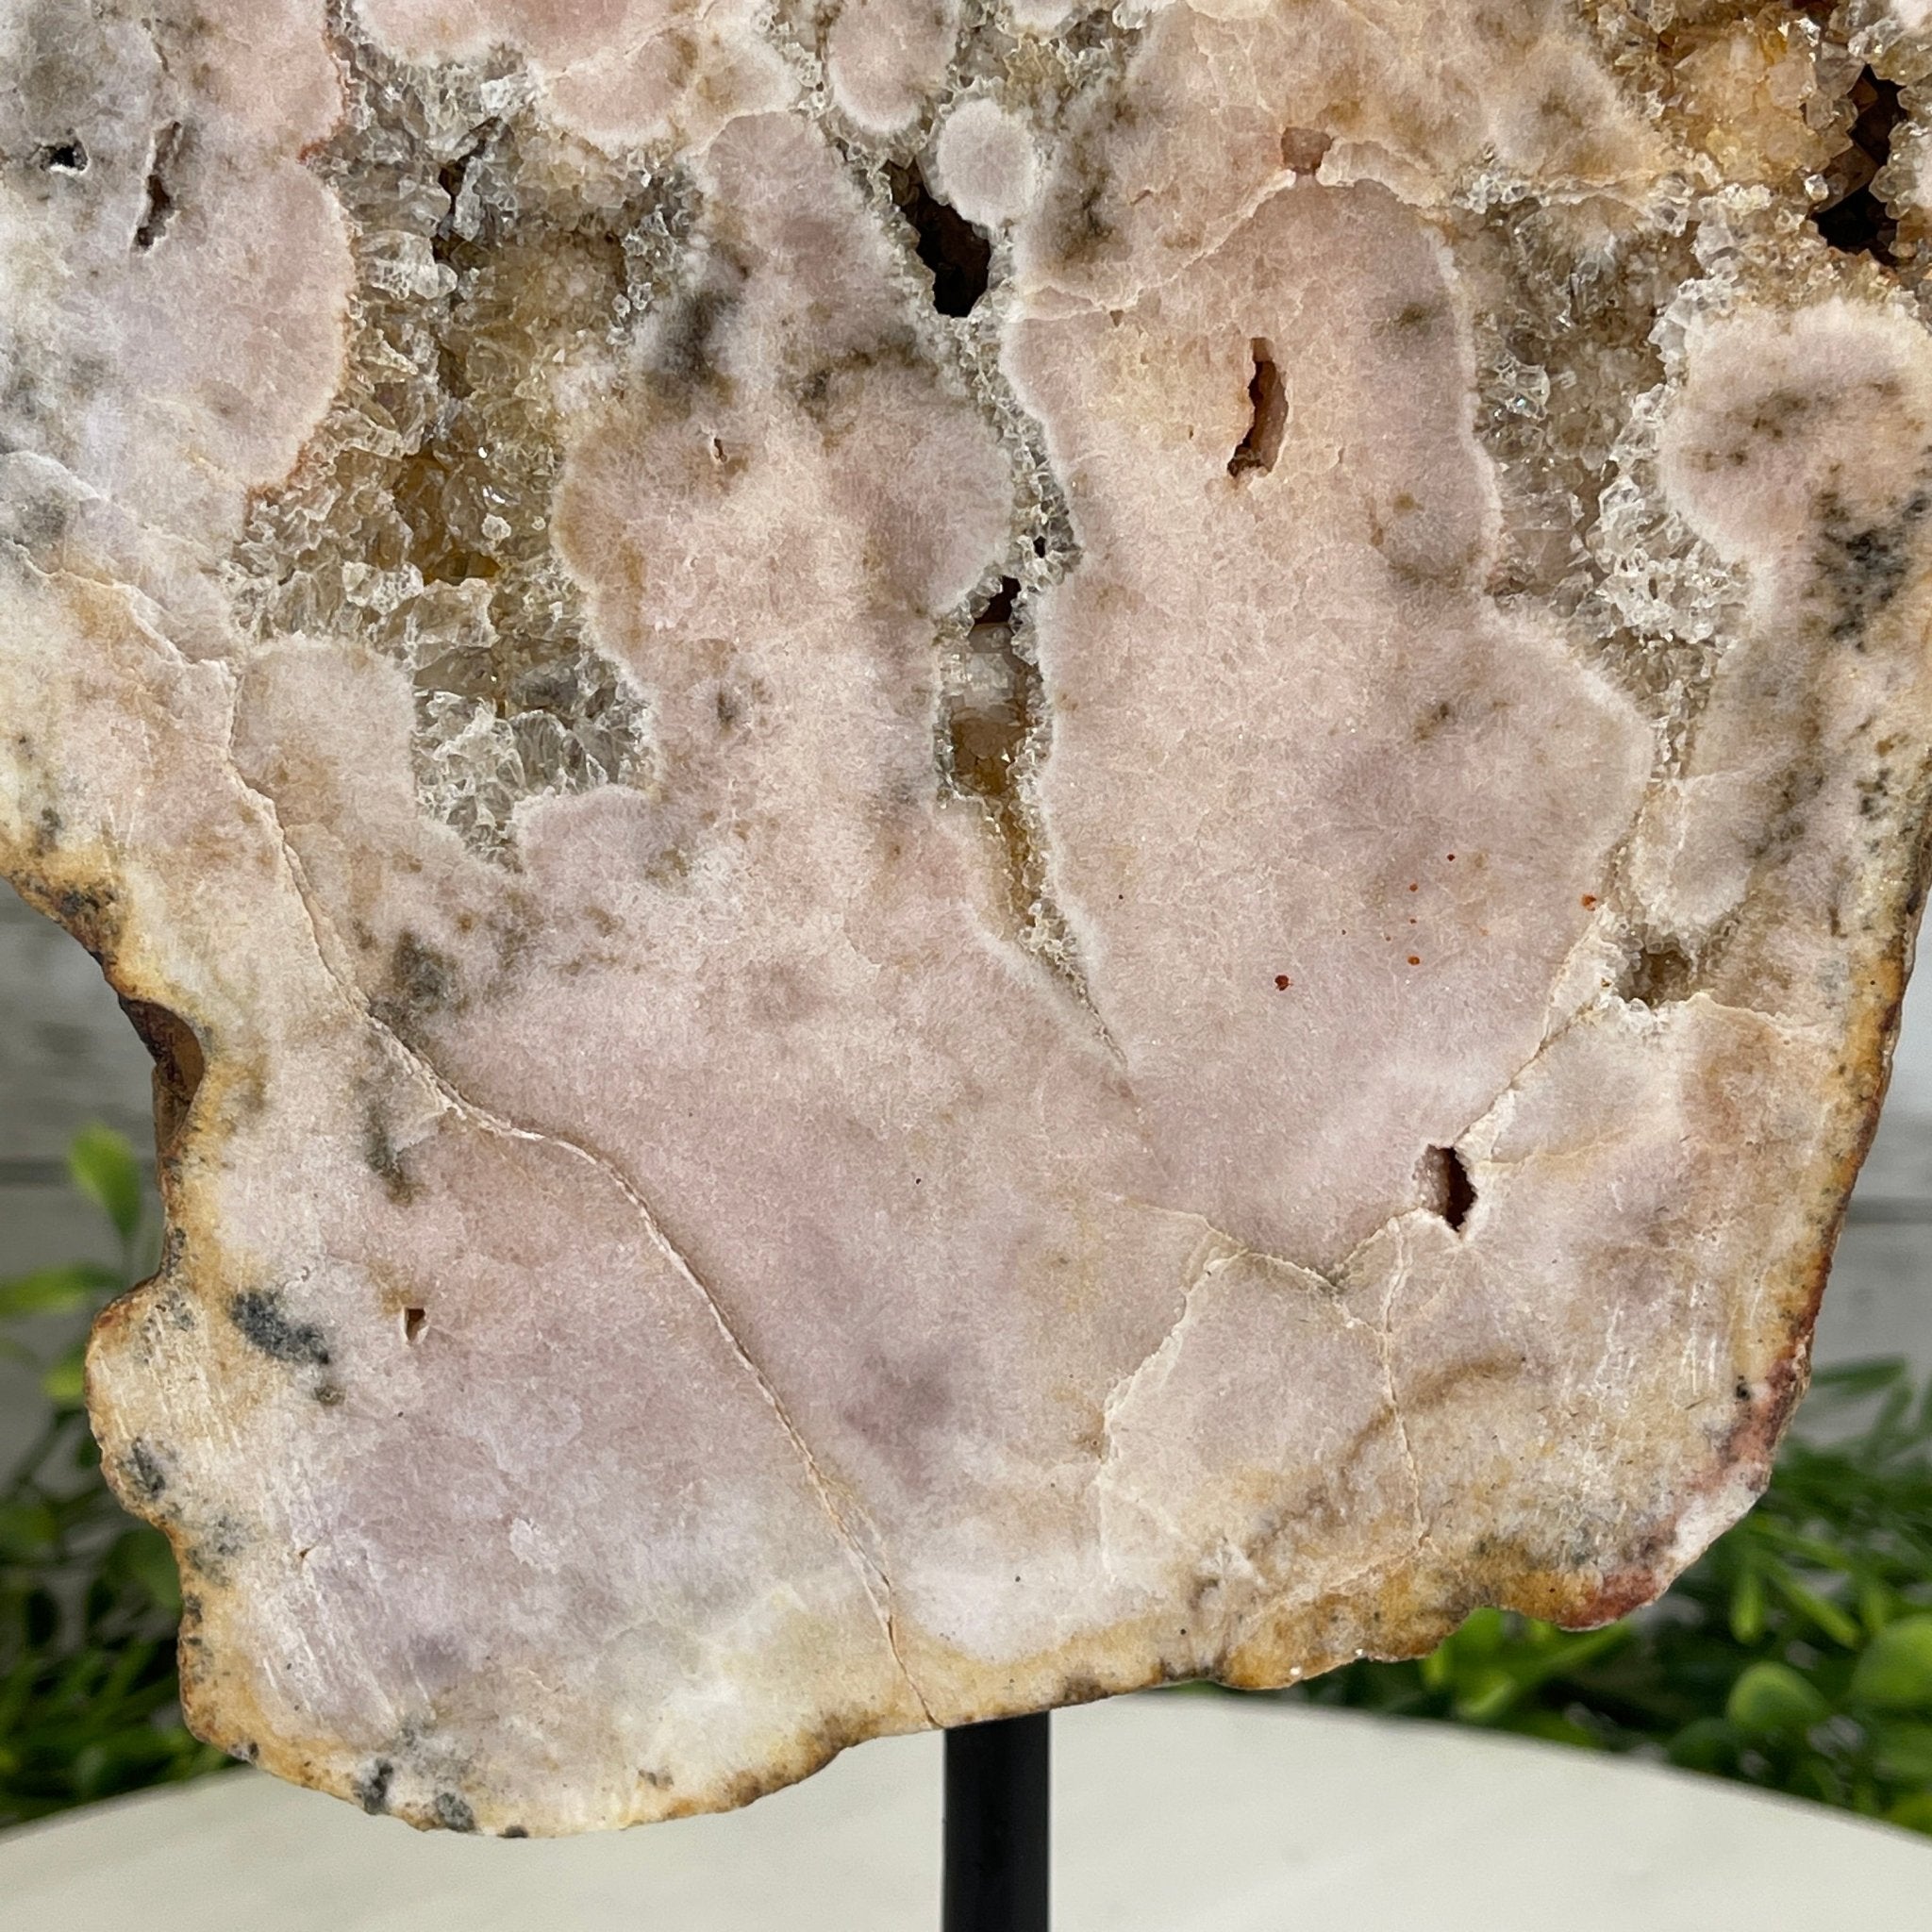 Pink Amethyst Slice on a Stand, 5.7 lbs and 11.7" Tall #5742-0041 by Brazil Gems - Brazil GemsBrazil GemsPink Amethyst Slice on a Stand, 5.7 lbs and 11.7" Tall #5742-0041 by Brazil GemsSlices on Fixed Bases5742-0041